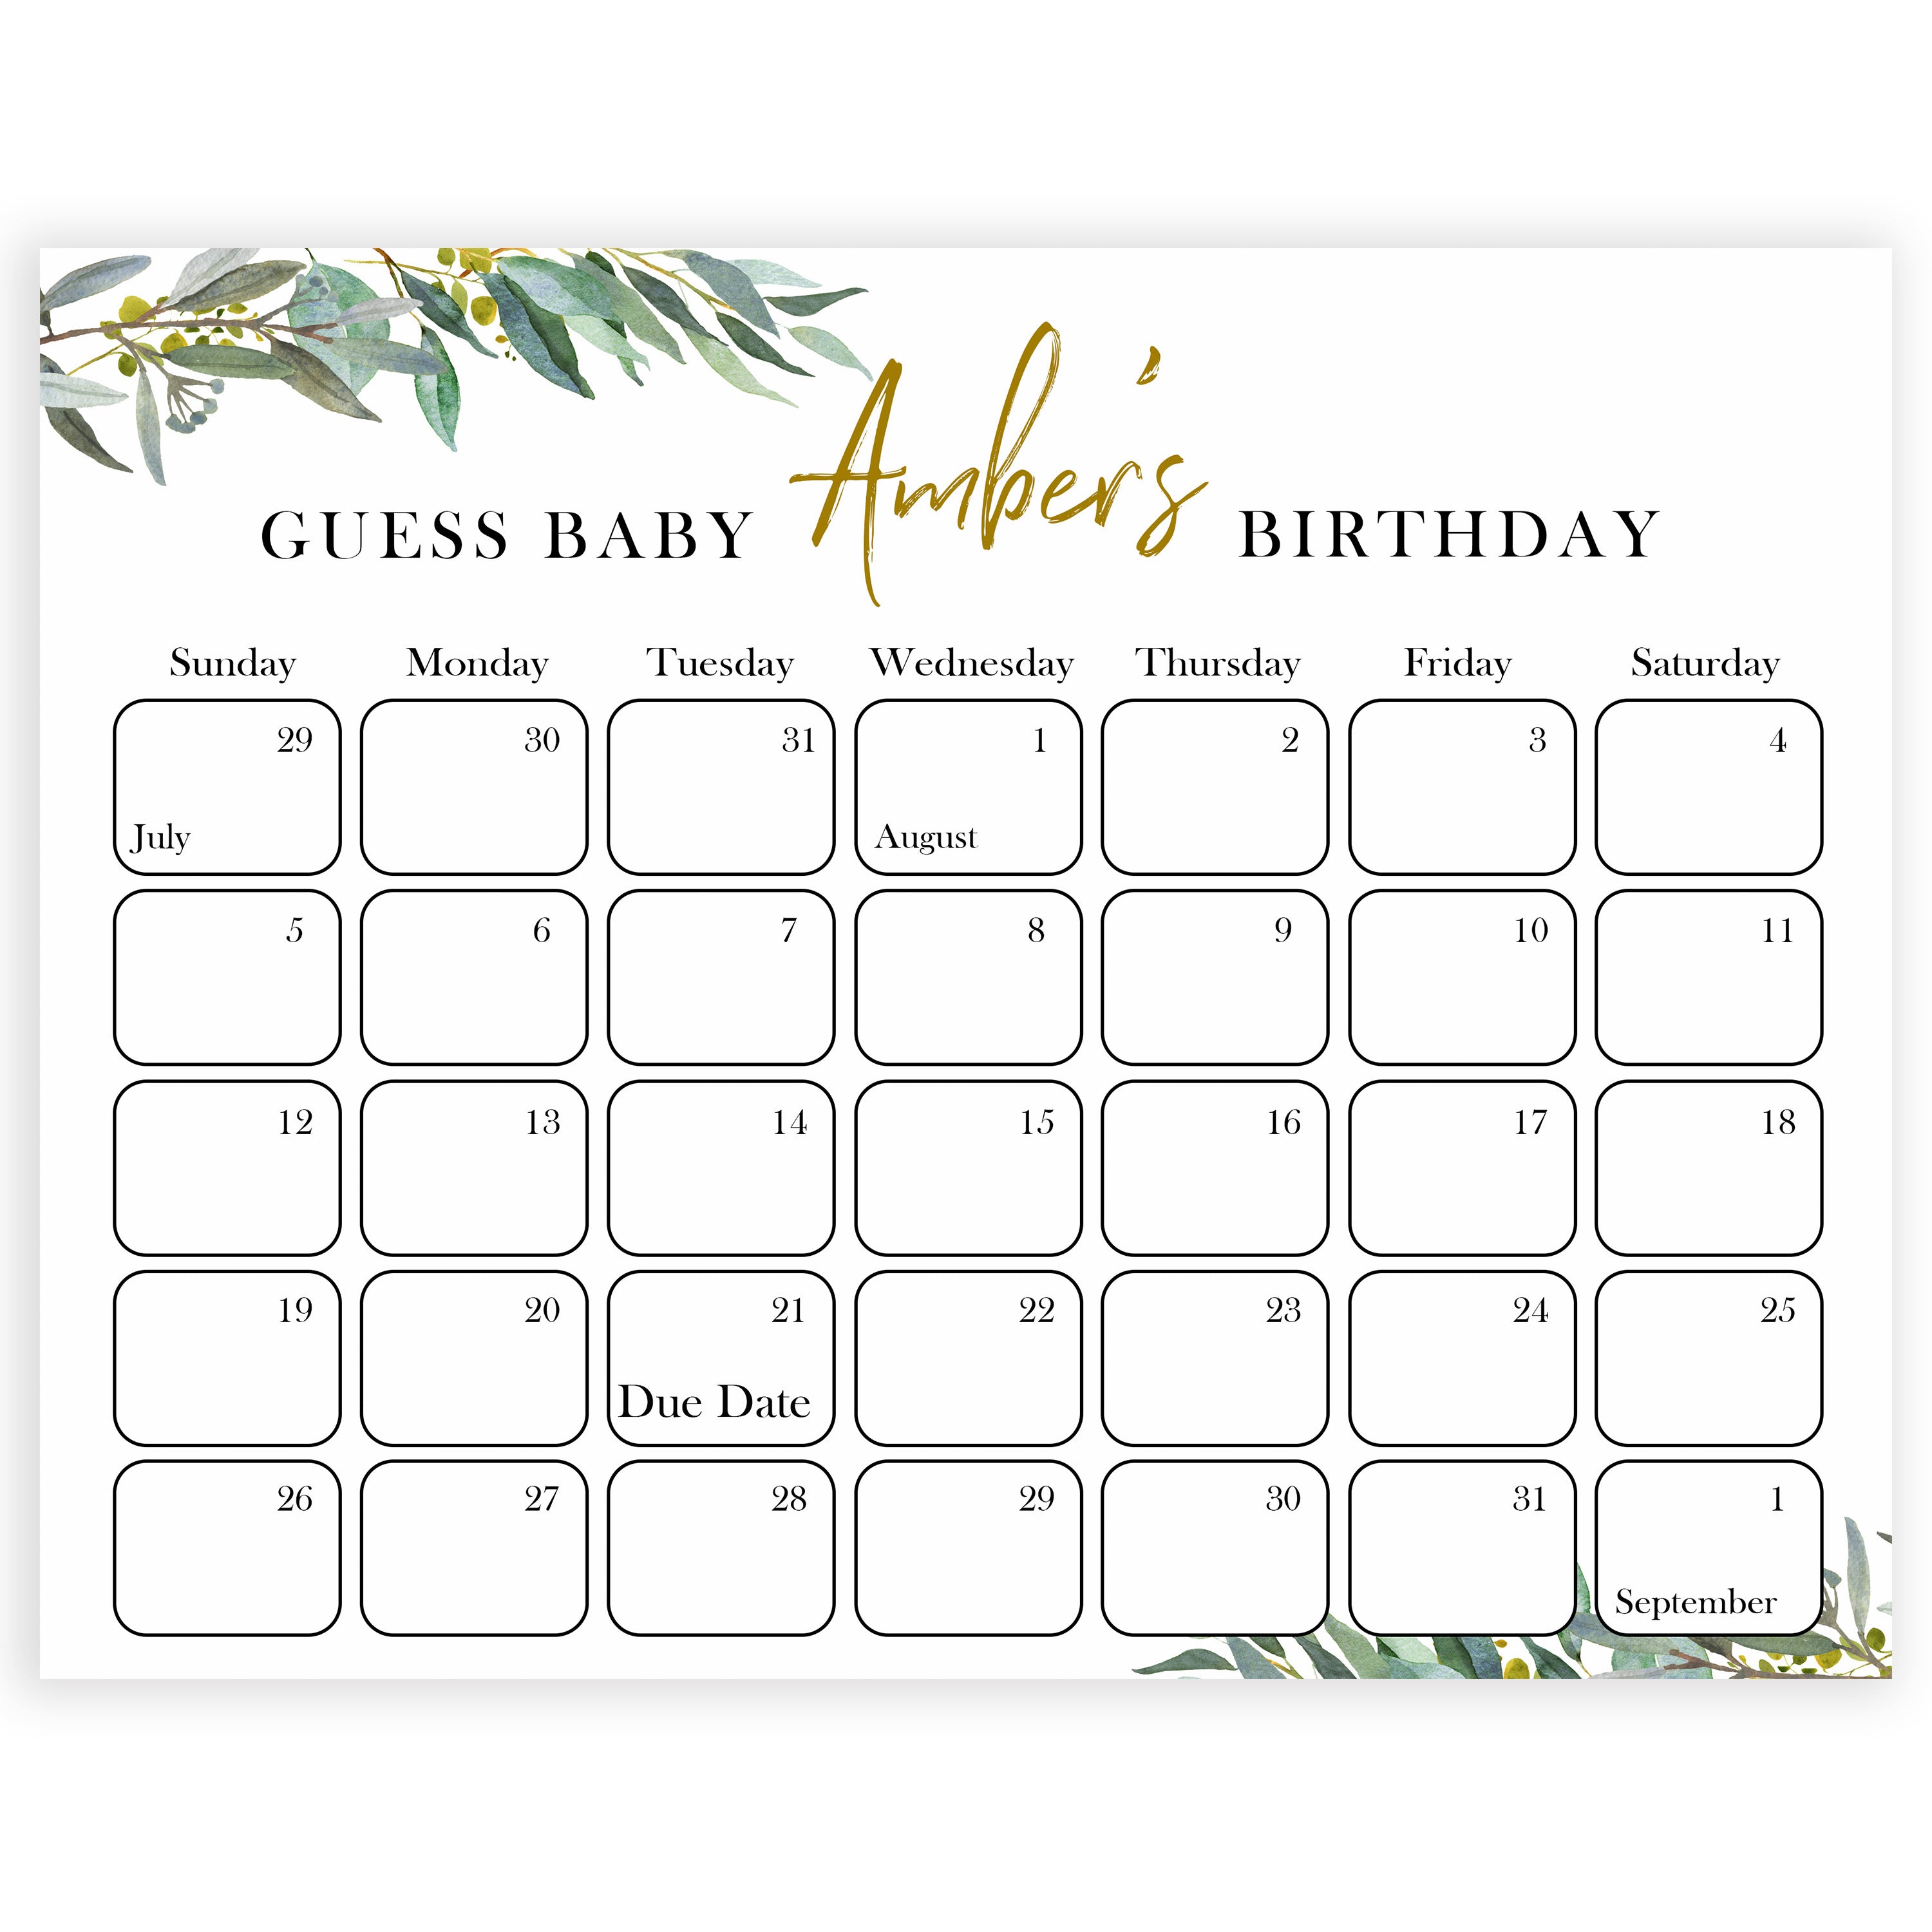 guess the baby birthday game, baby birthday predictions game, printable baby games, fun baby shower games, floral baby games